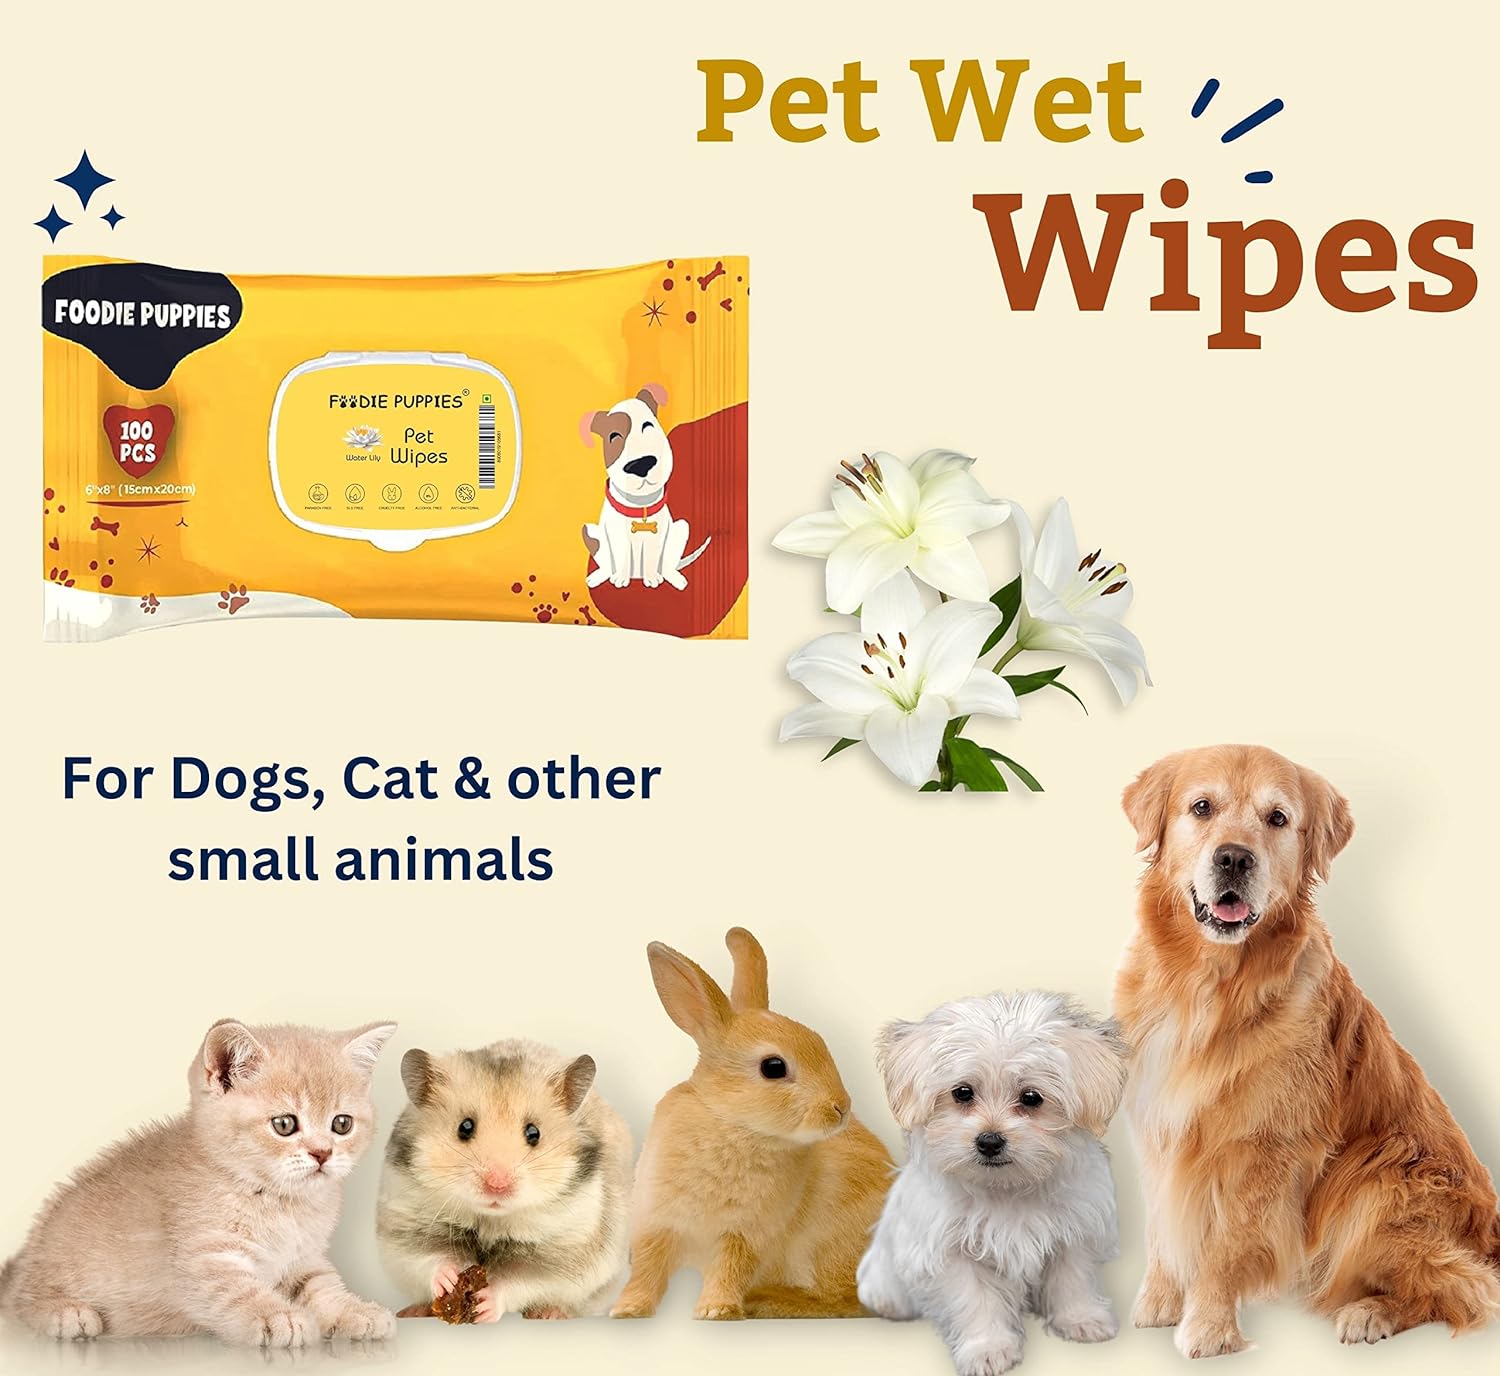 pet cleaning wipes 